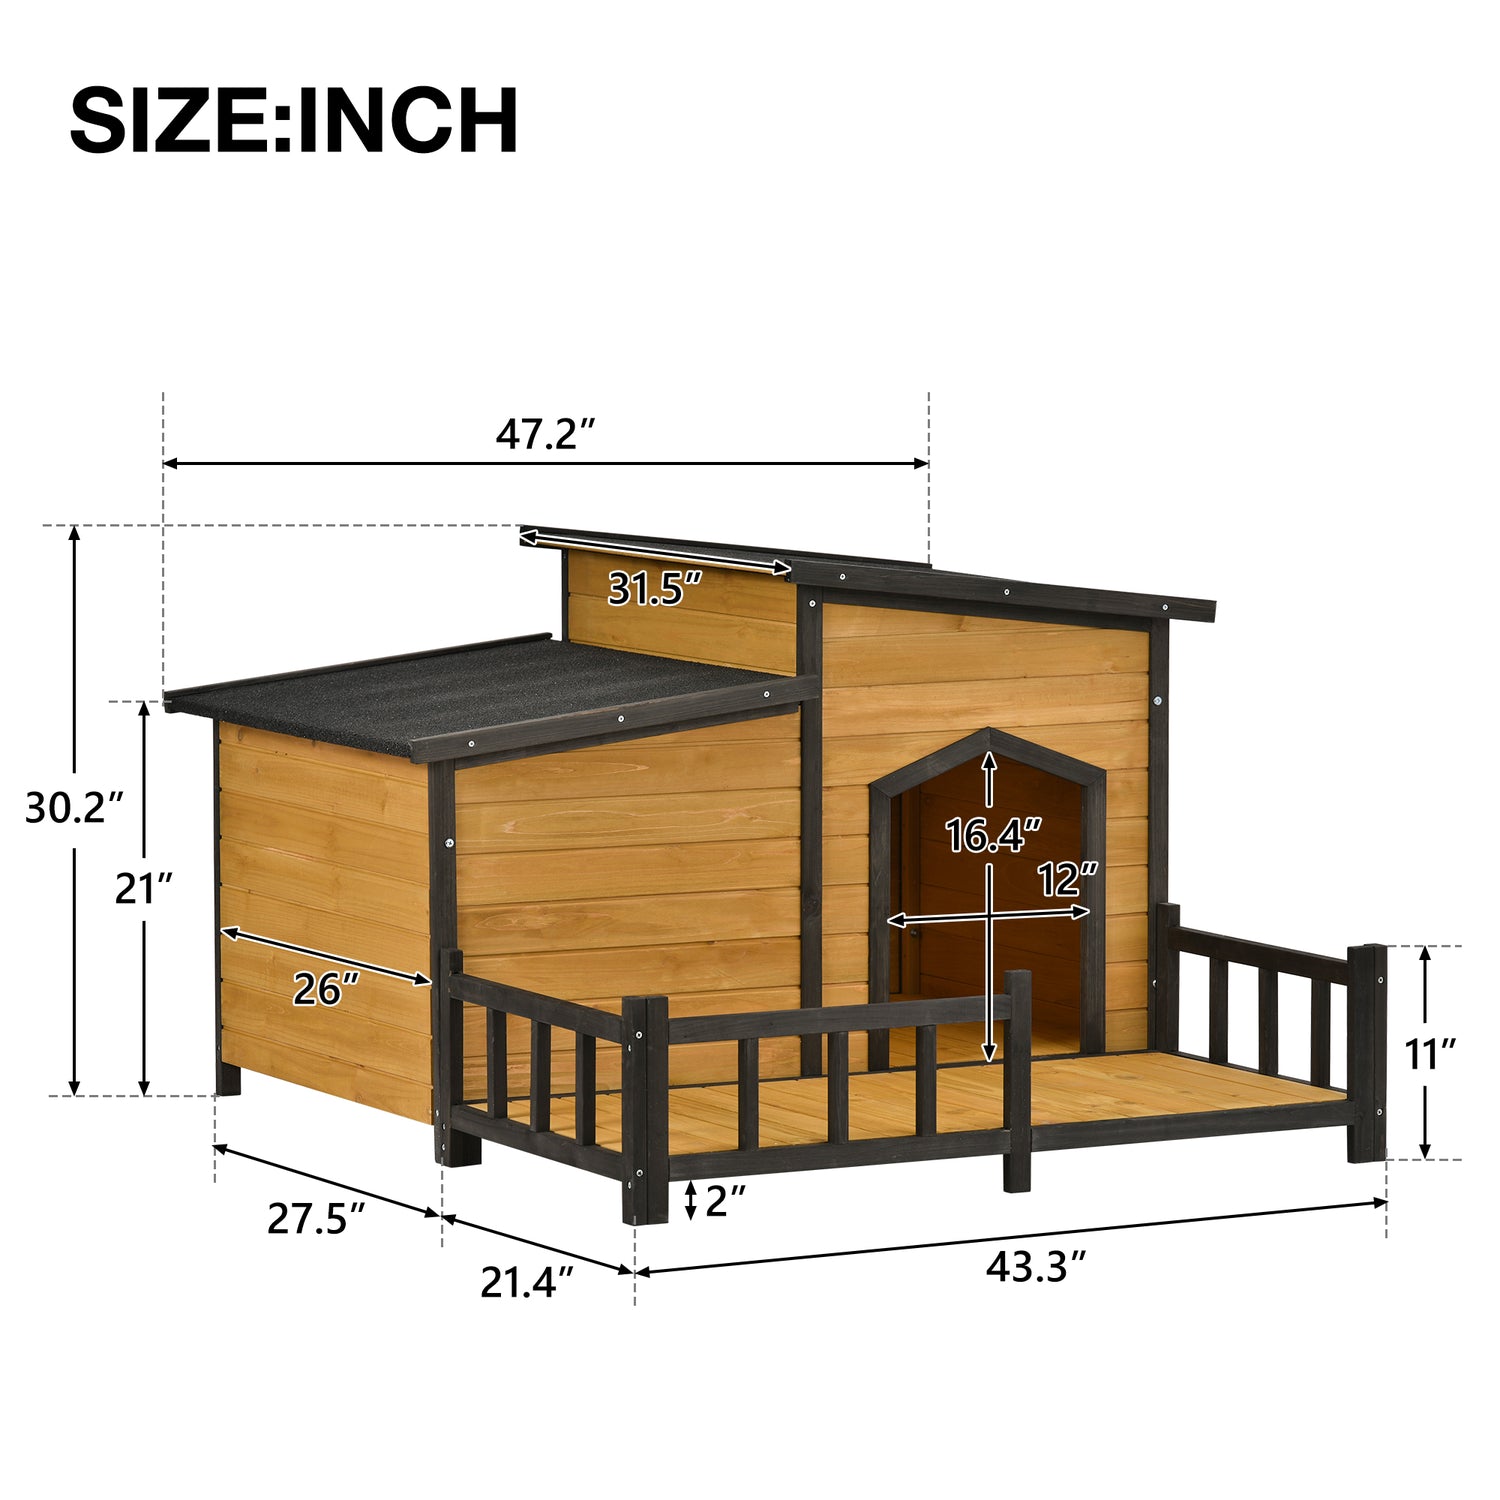 CHURANTY 47.2 Inch Large Wooden Pet Outdoor Wooden Dog House with Porch,Dog Kennel Cabin Style Outdoor & Indoor Dog Crate